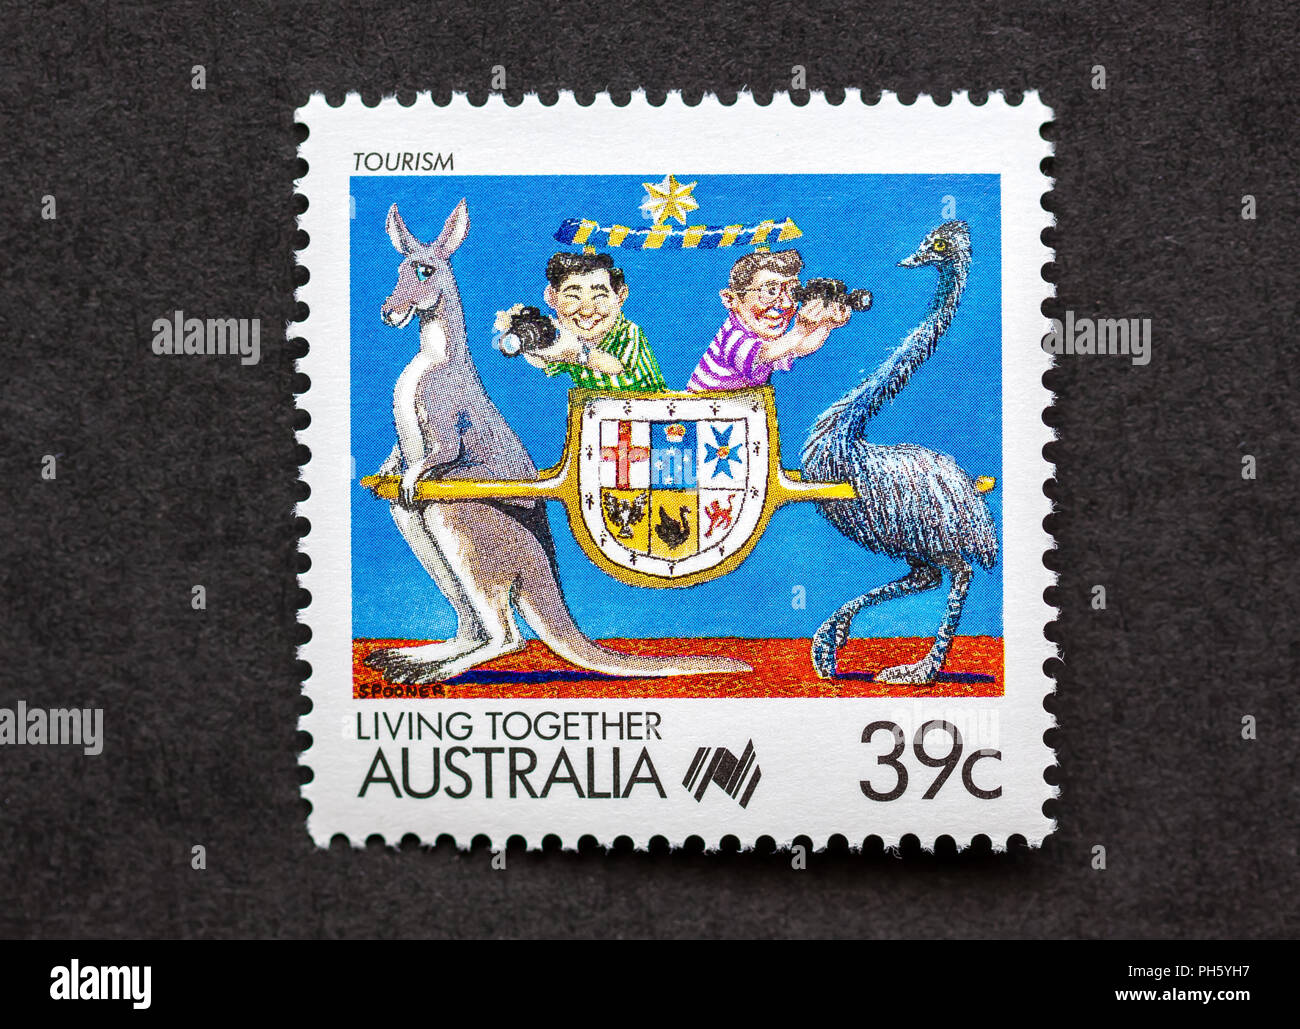 Postage Stamp Australia High Resolution Stock Photography and Images - Alamy